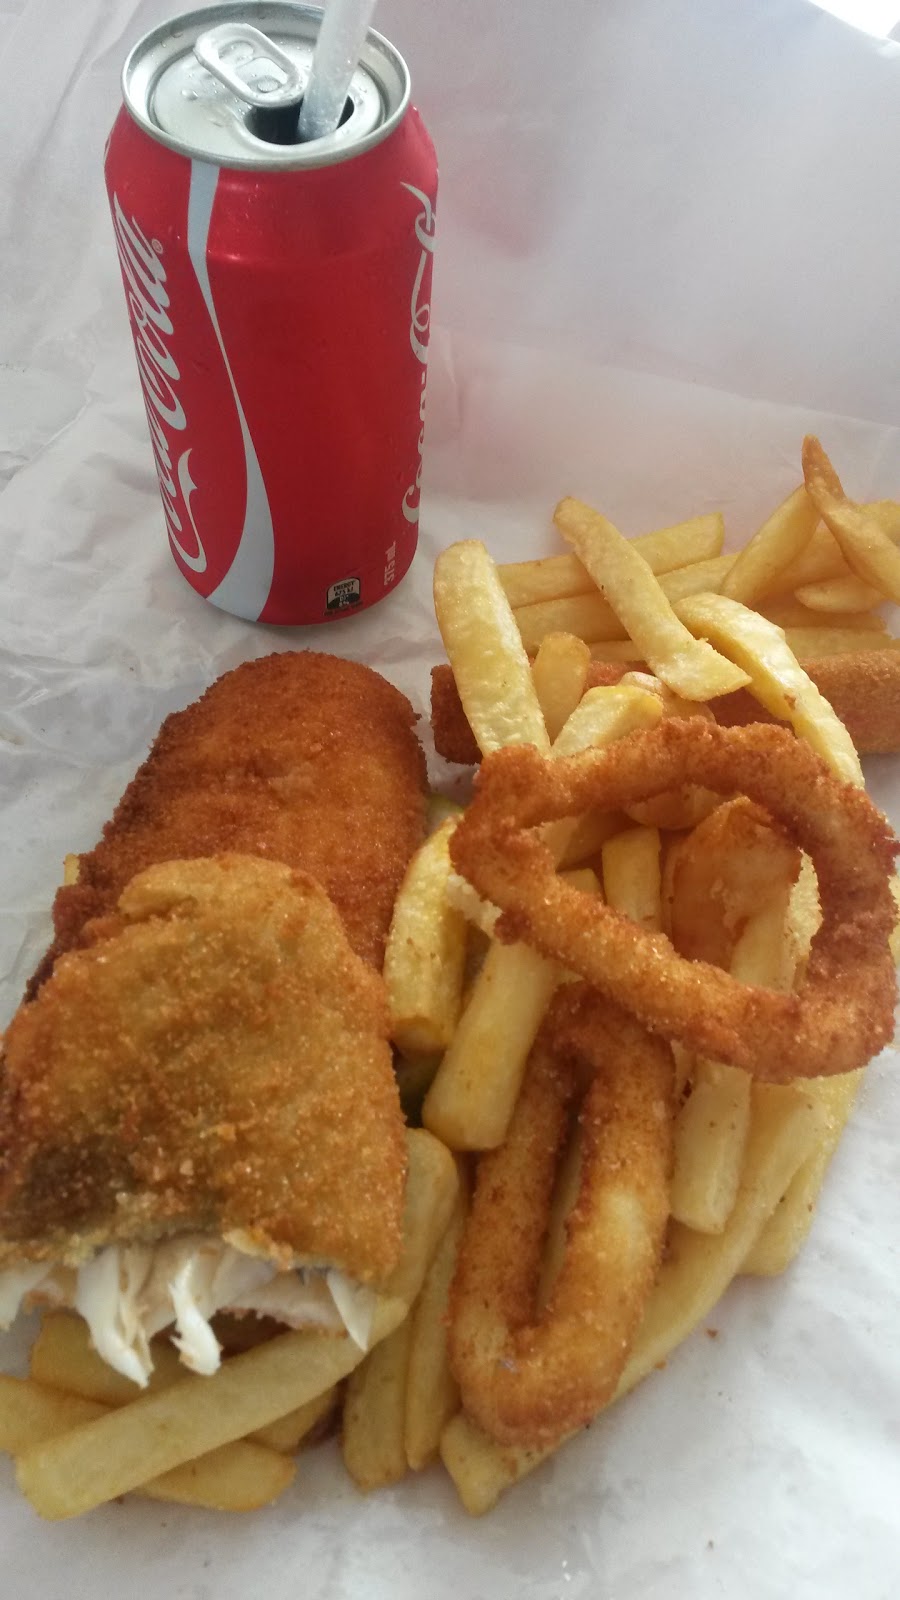 FLIPPERS FISH & CHIPS | 18 Sims Rd, Walkervale QLD 4670, Australia | Phone: (07) 4152 0042